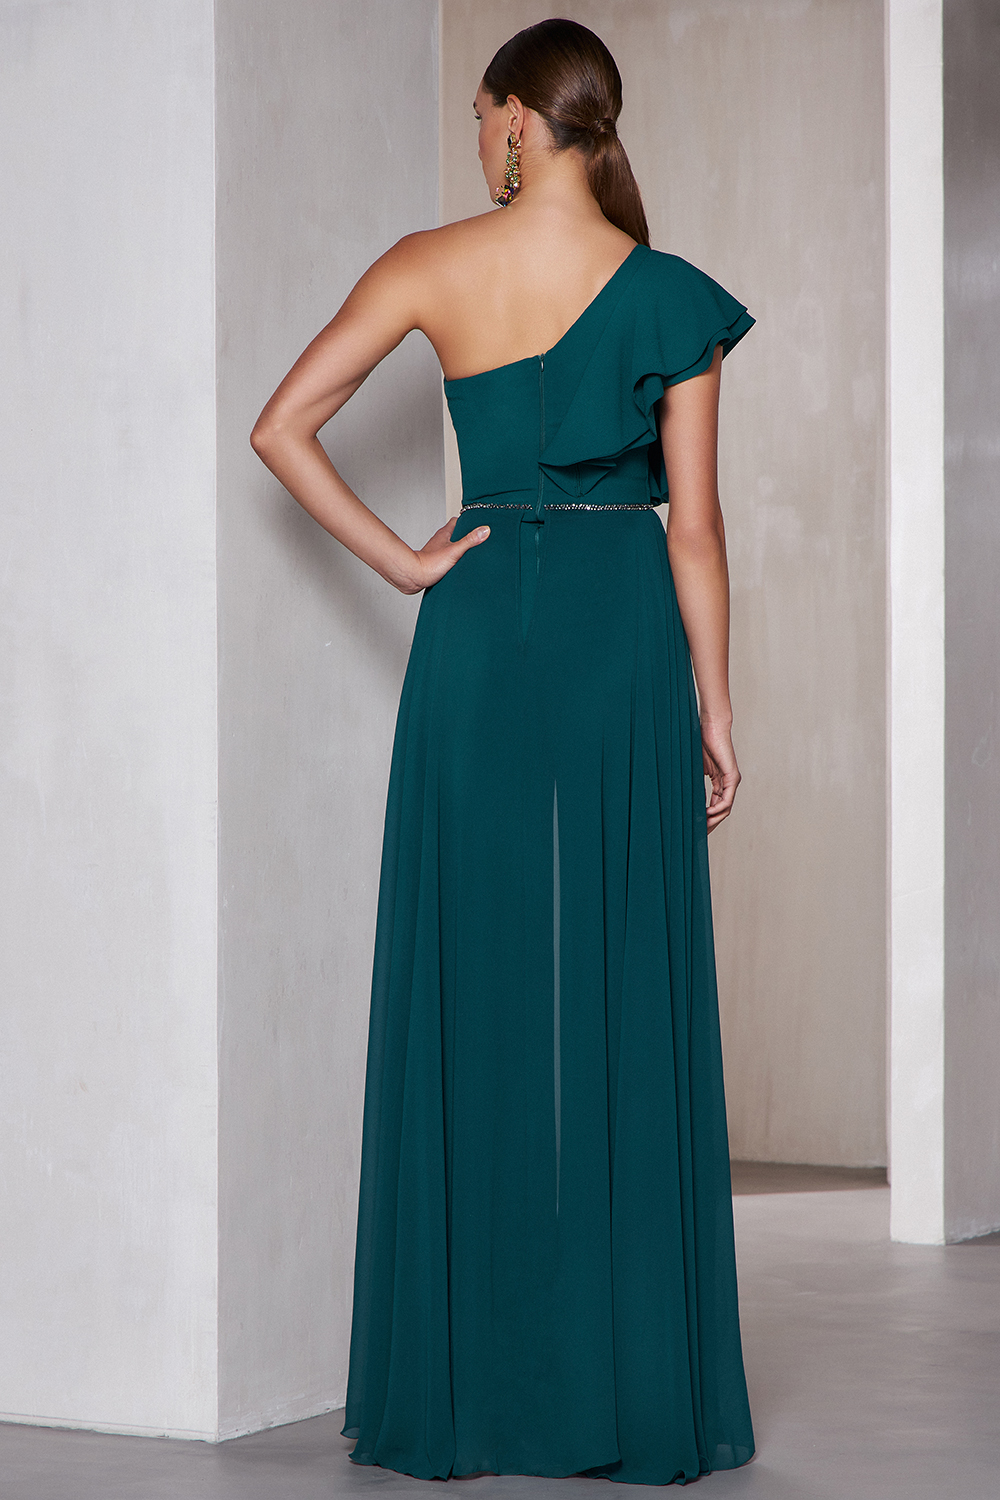 Cocktail Dresses / One shoulder cocktail jumpsuit with chiffon fabric